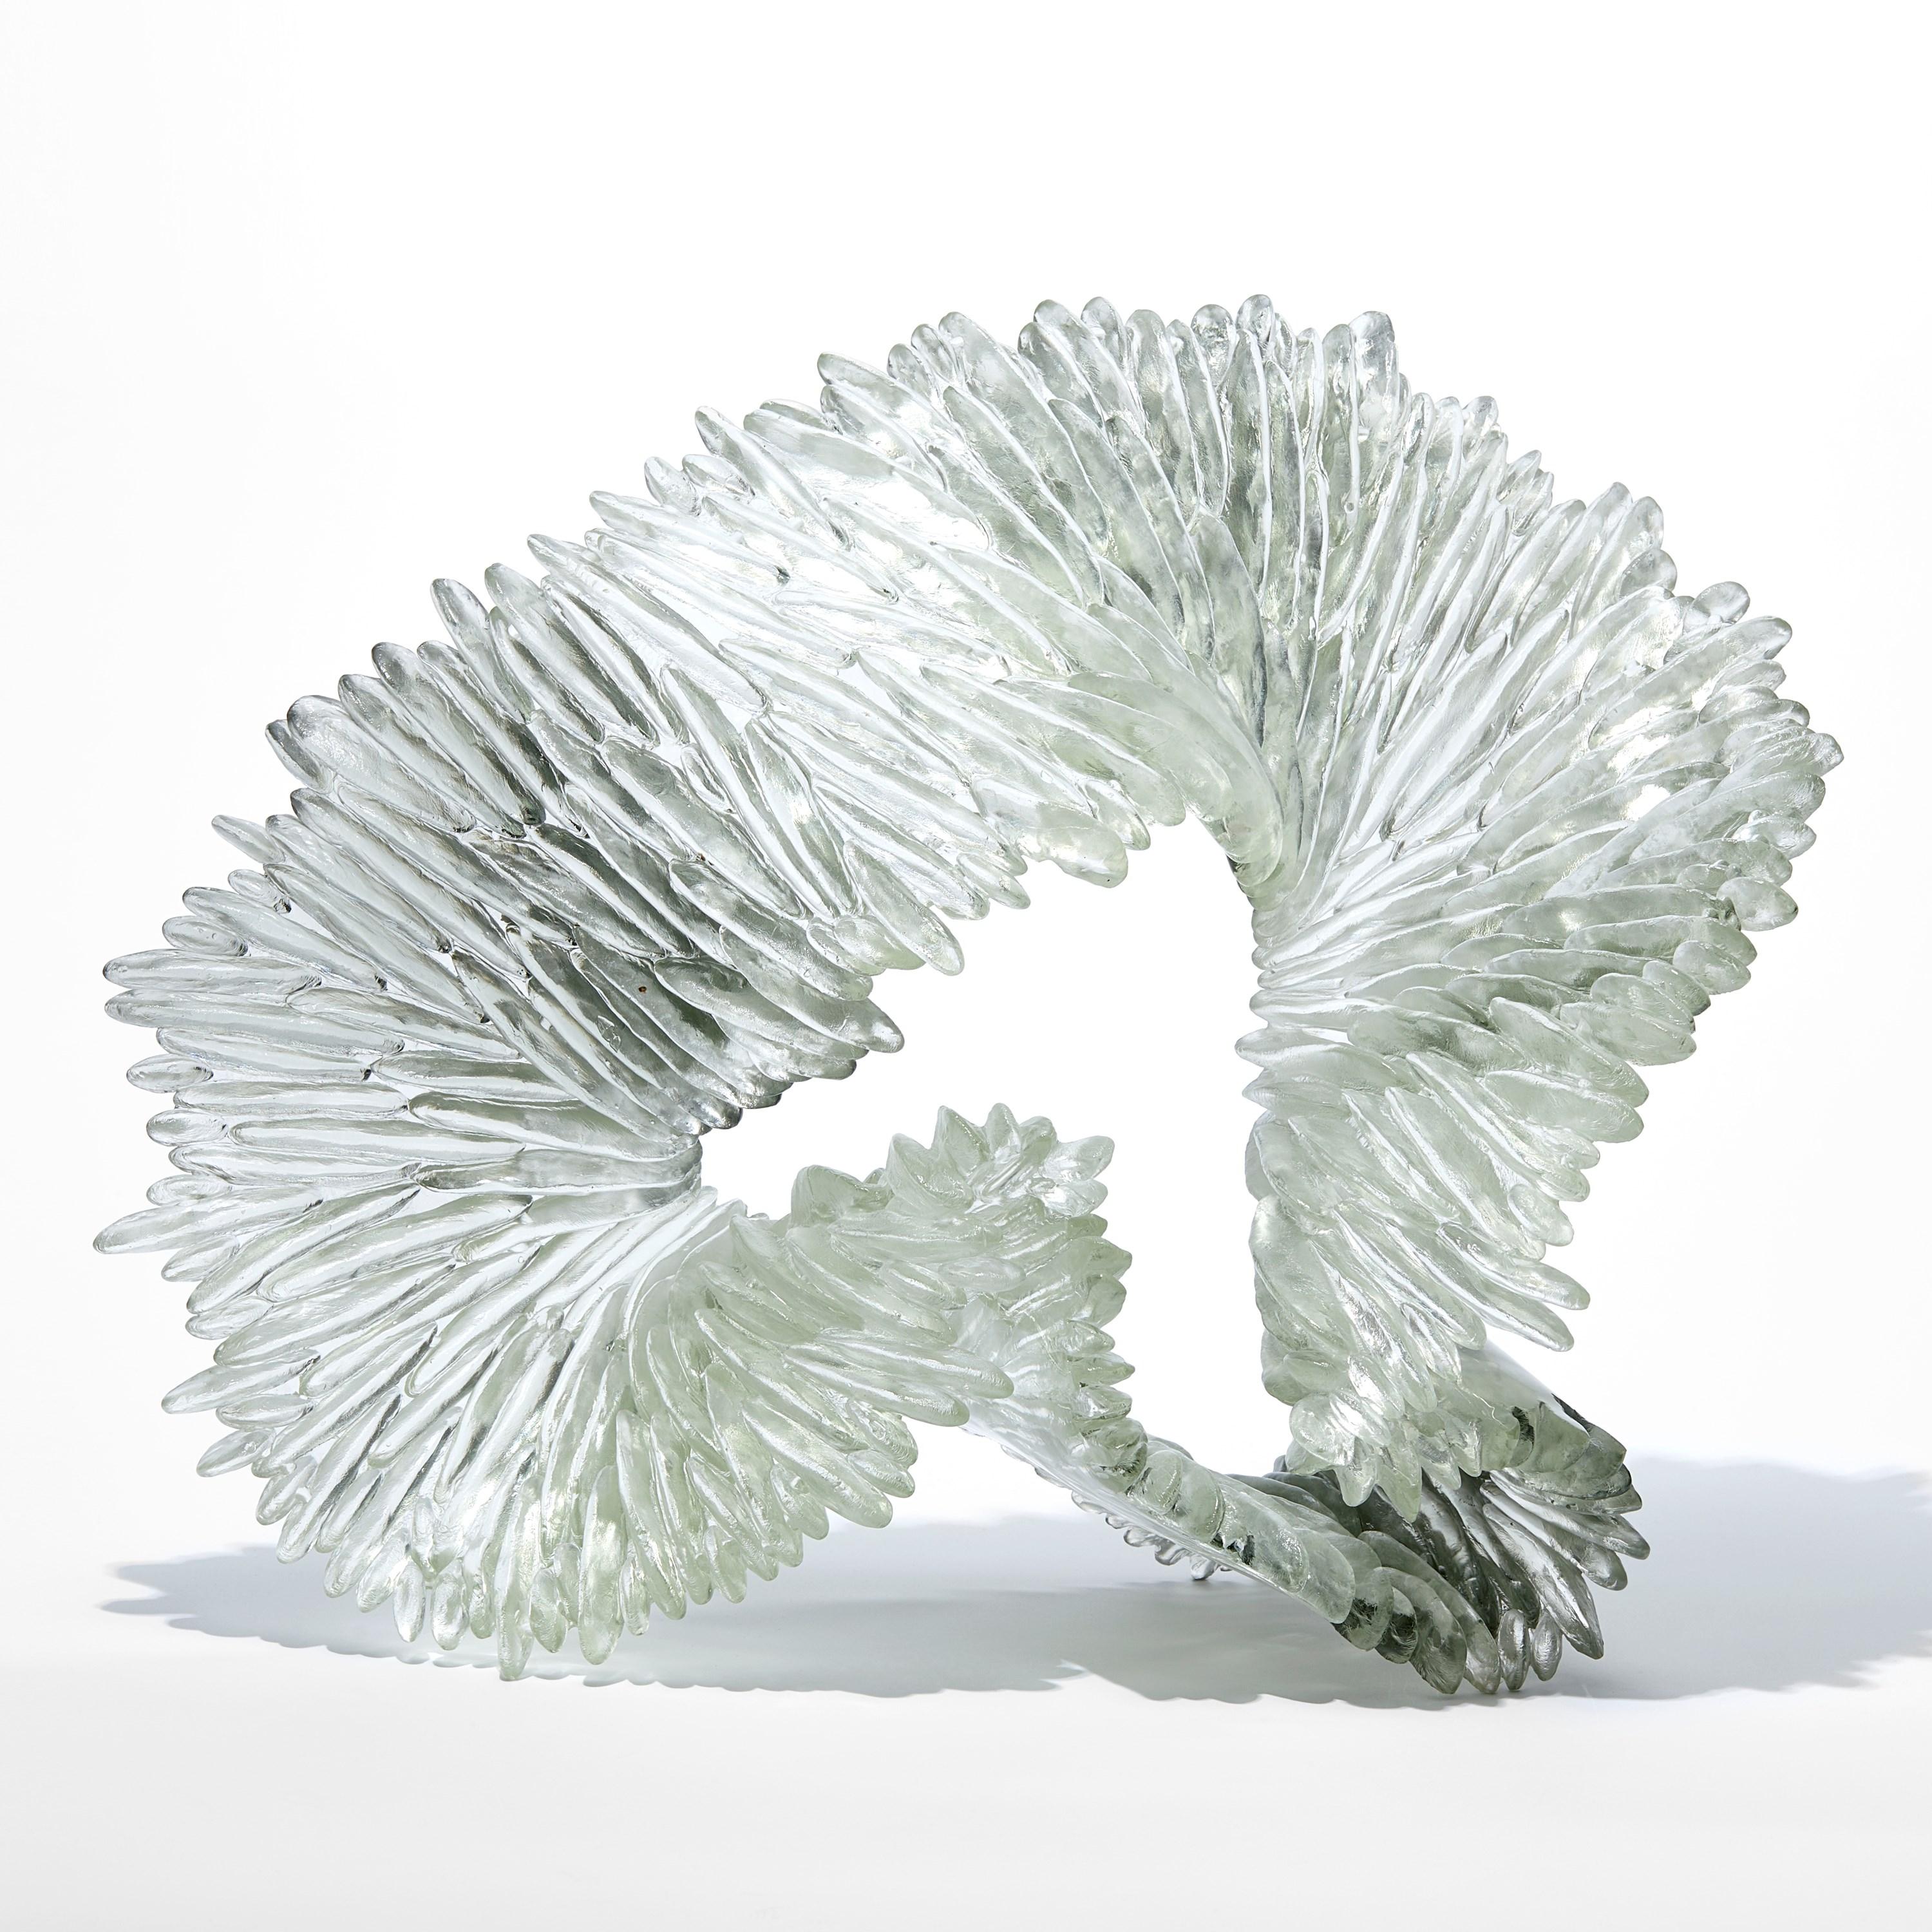 'Lamellae II' is a unique glass sculpture by the British artist, Nina Casson McGarva.

Casson McGarva firstly casts her glass in a flat mould where she introduces all of the beautifully detailed, scaled surface texture, all unique and to her